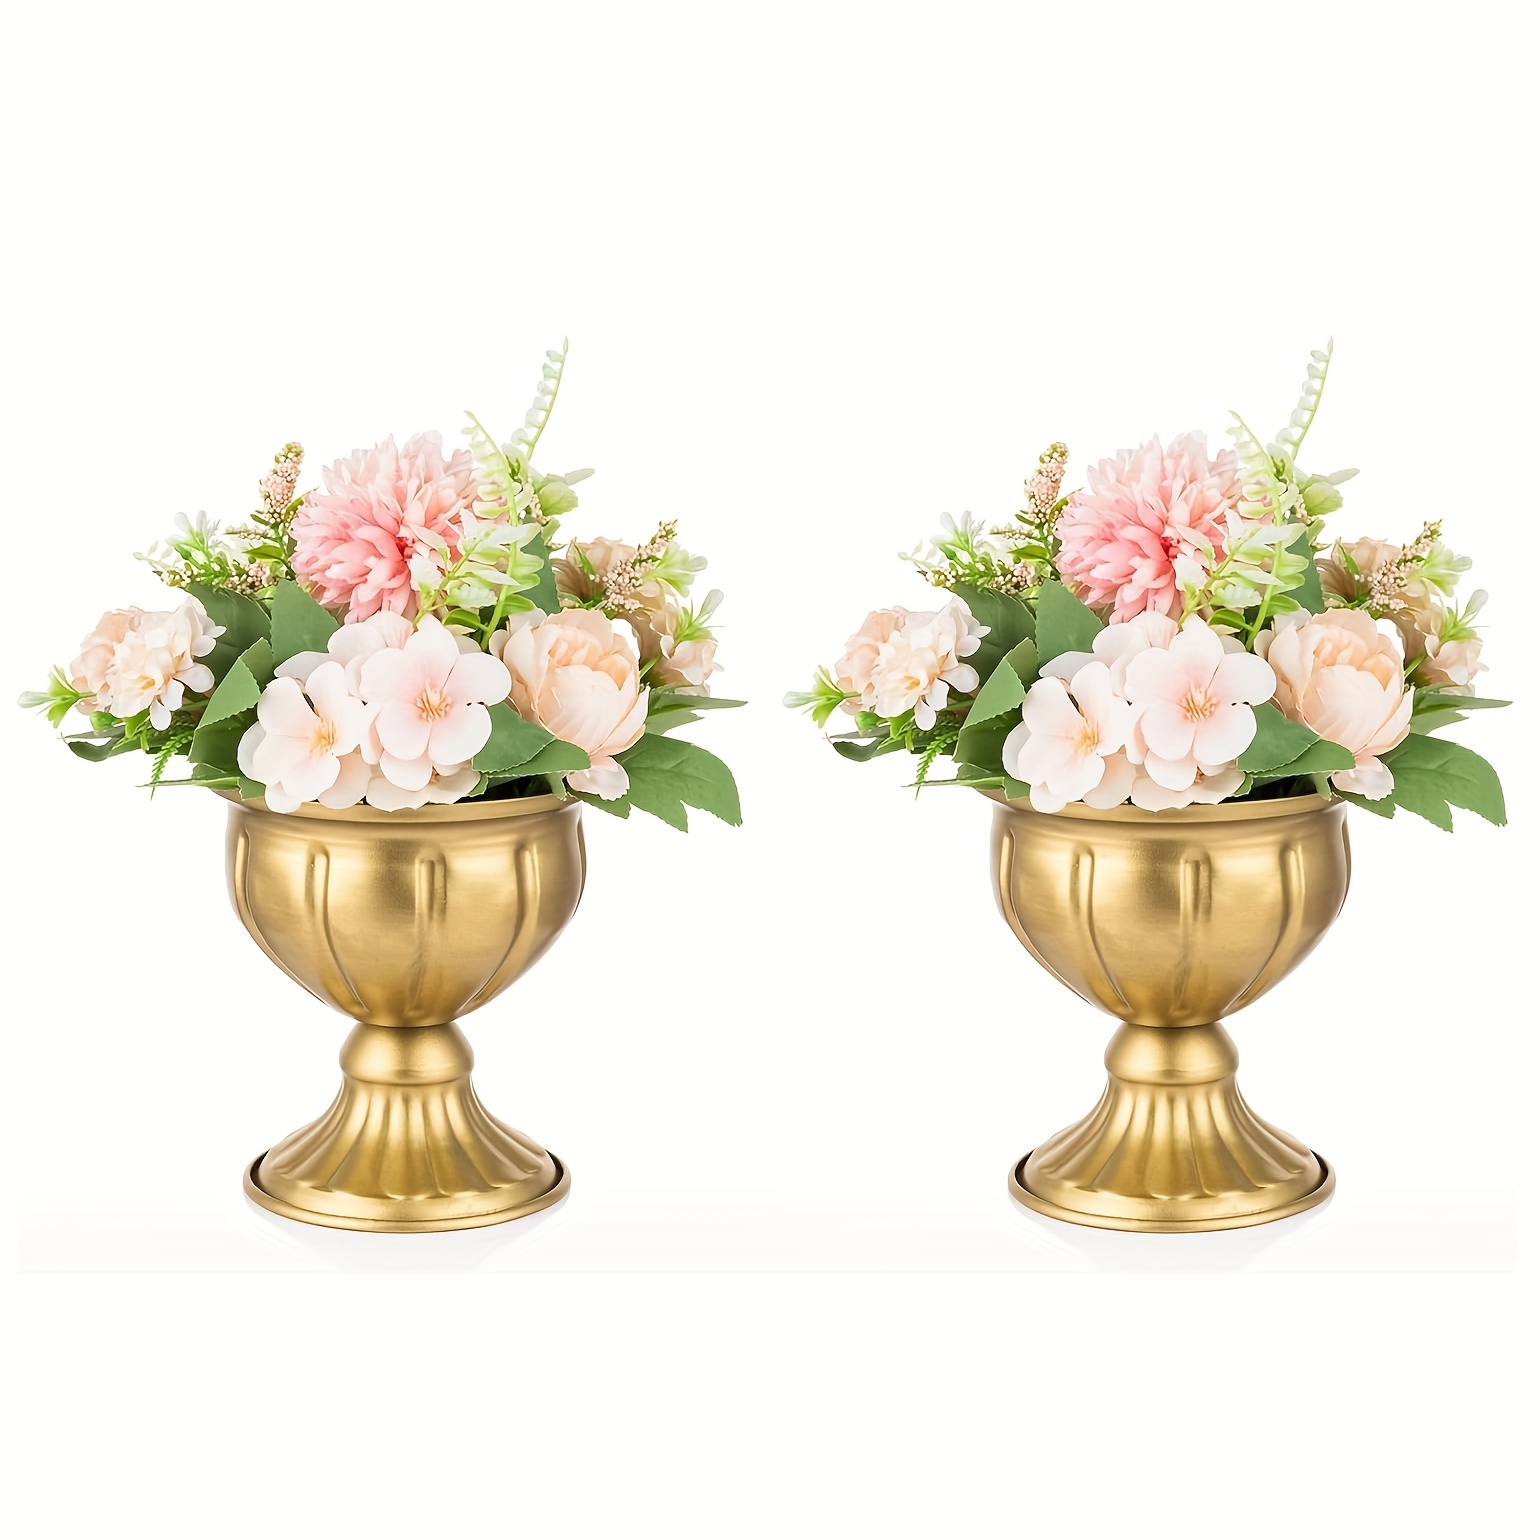 

2pcs, Metal Golden Flower Vase For Wedding Centerpieces, Indoor Table Decoration Centrepieces For Dining Room, Small Planter Outdoor Flower Plant Pots Holder For Anniversary Birthday